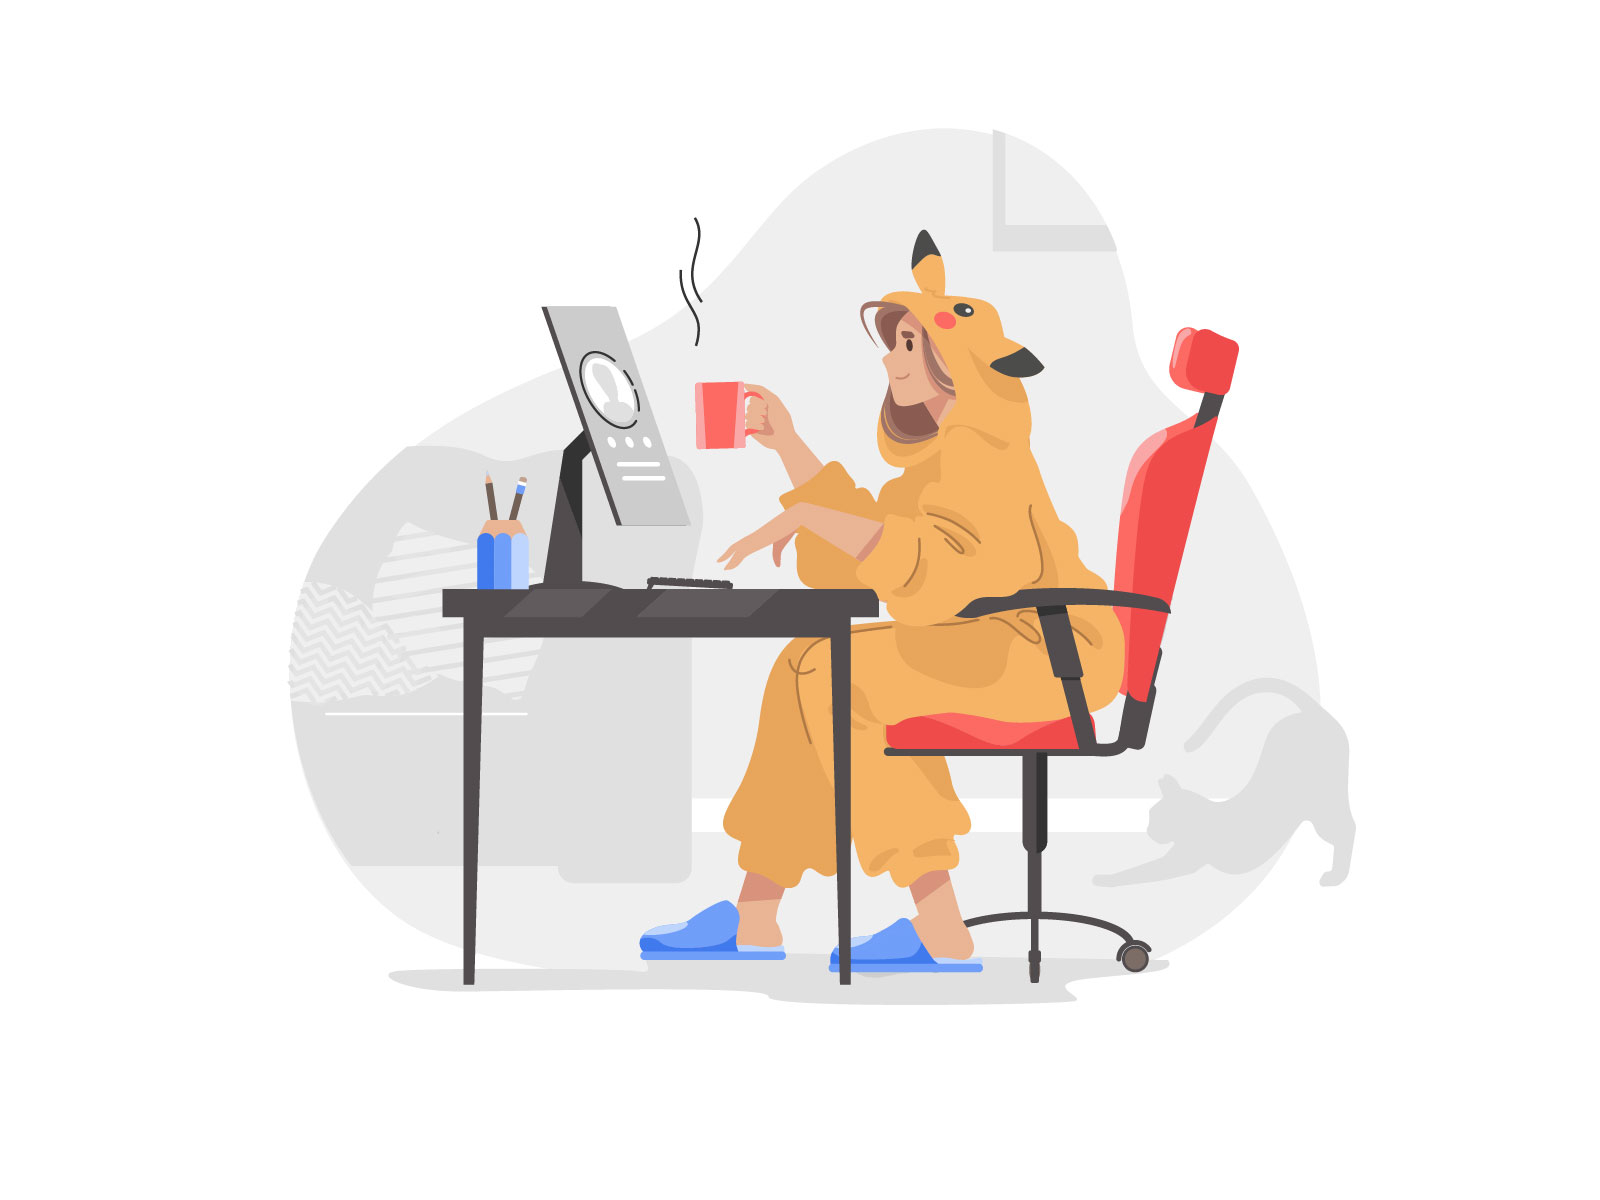 COVID Reality - WFH art character character design covid 19 design digital art graphic illustration illustration art illustrator quarantine quarantine life remote remote work shakuro stay home vector vector illustration work from home working